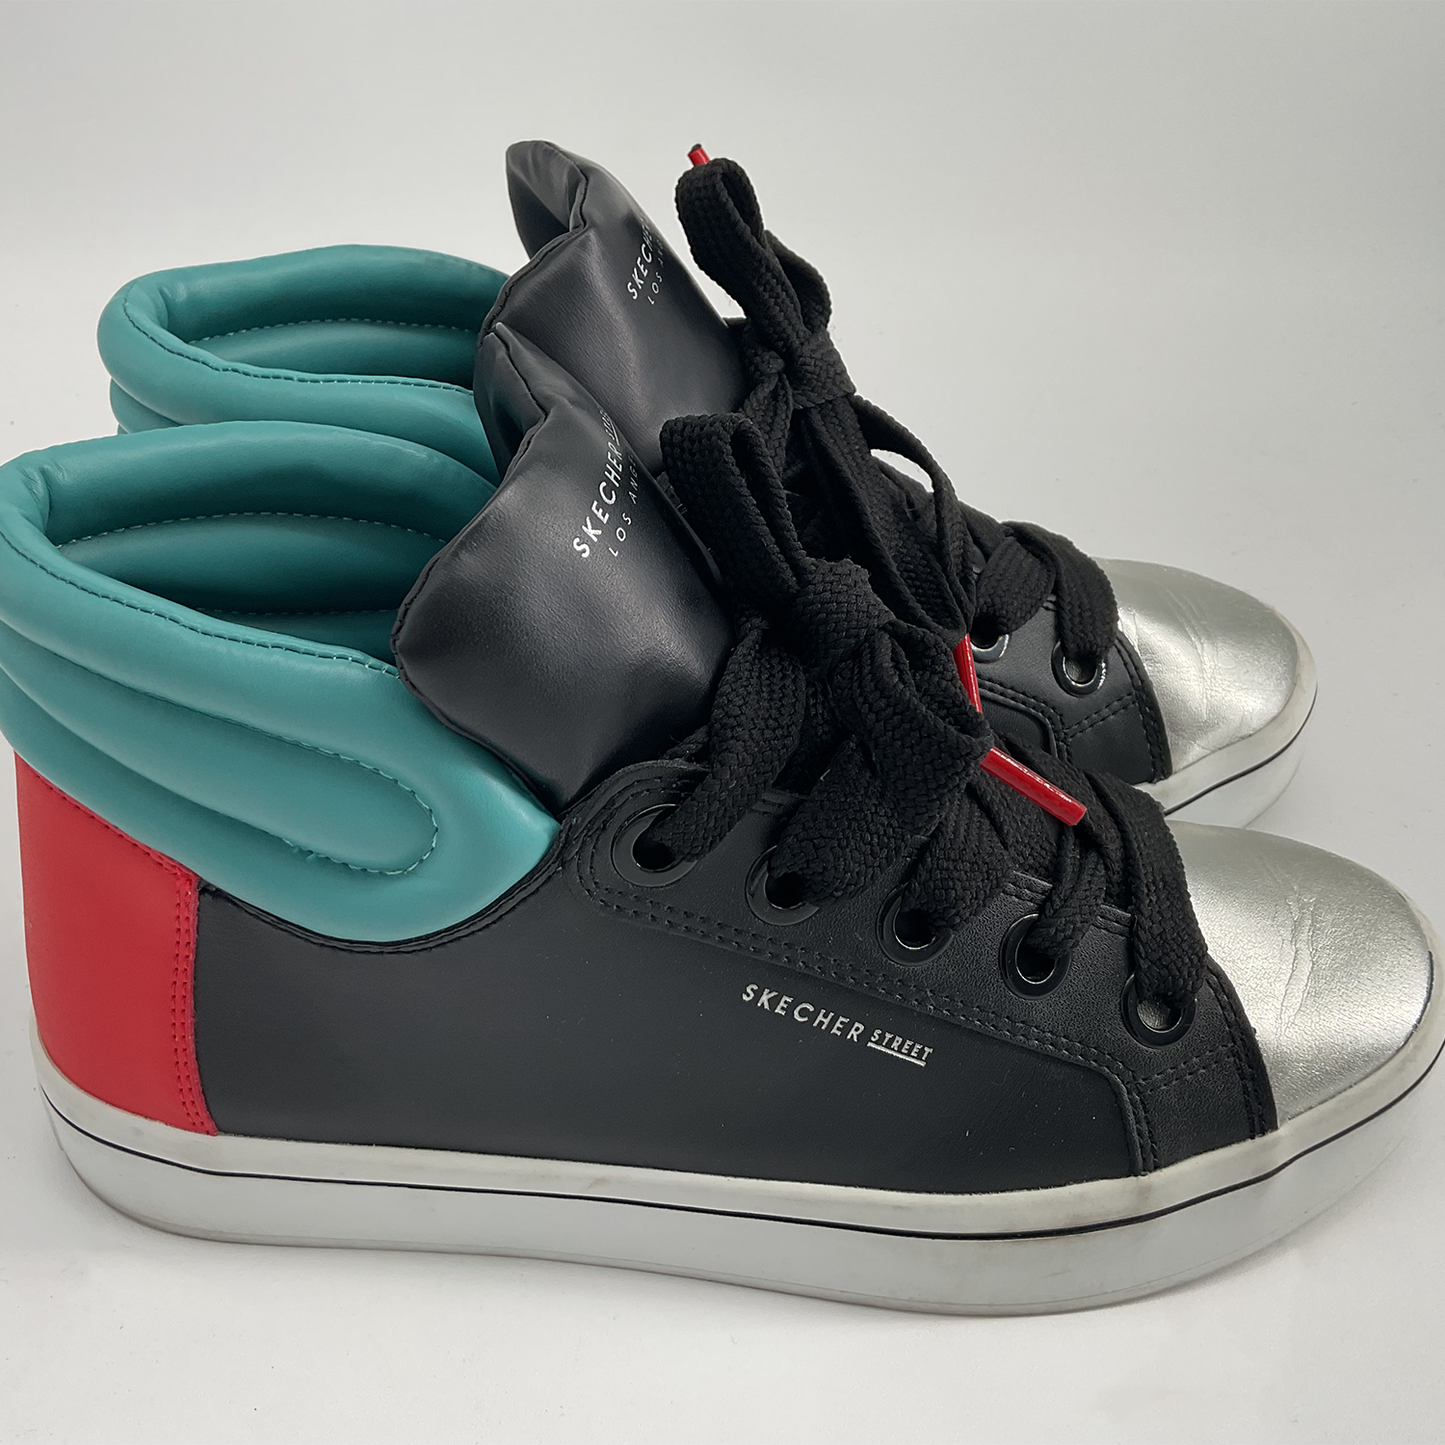 Skecher Street Los Angeles Air Cooled Memory Foam for Women (Size 9) Color Black, Aqua and Red (Used)